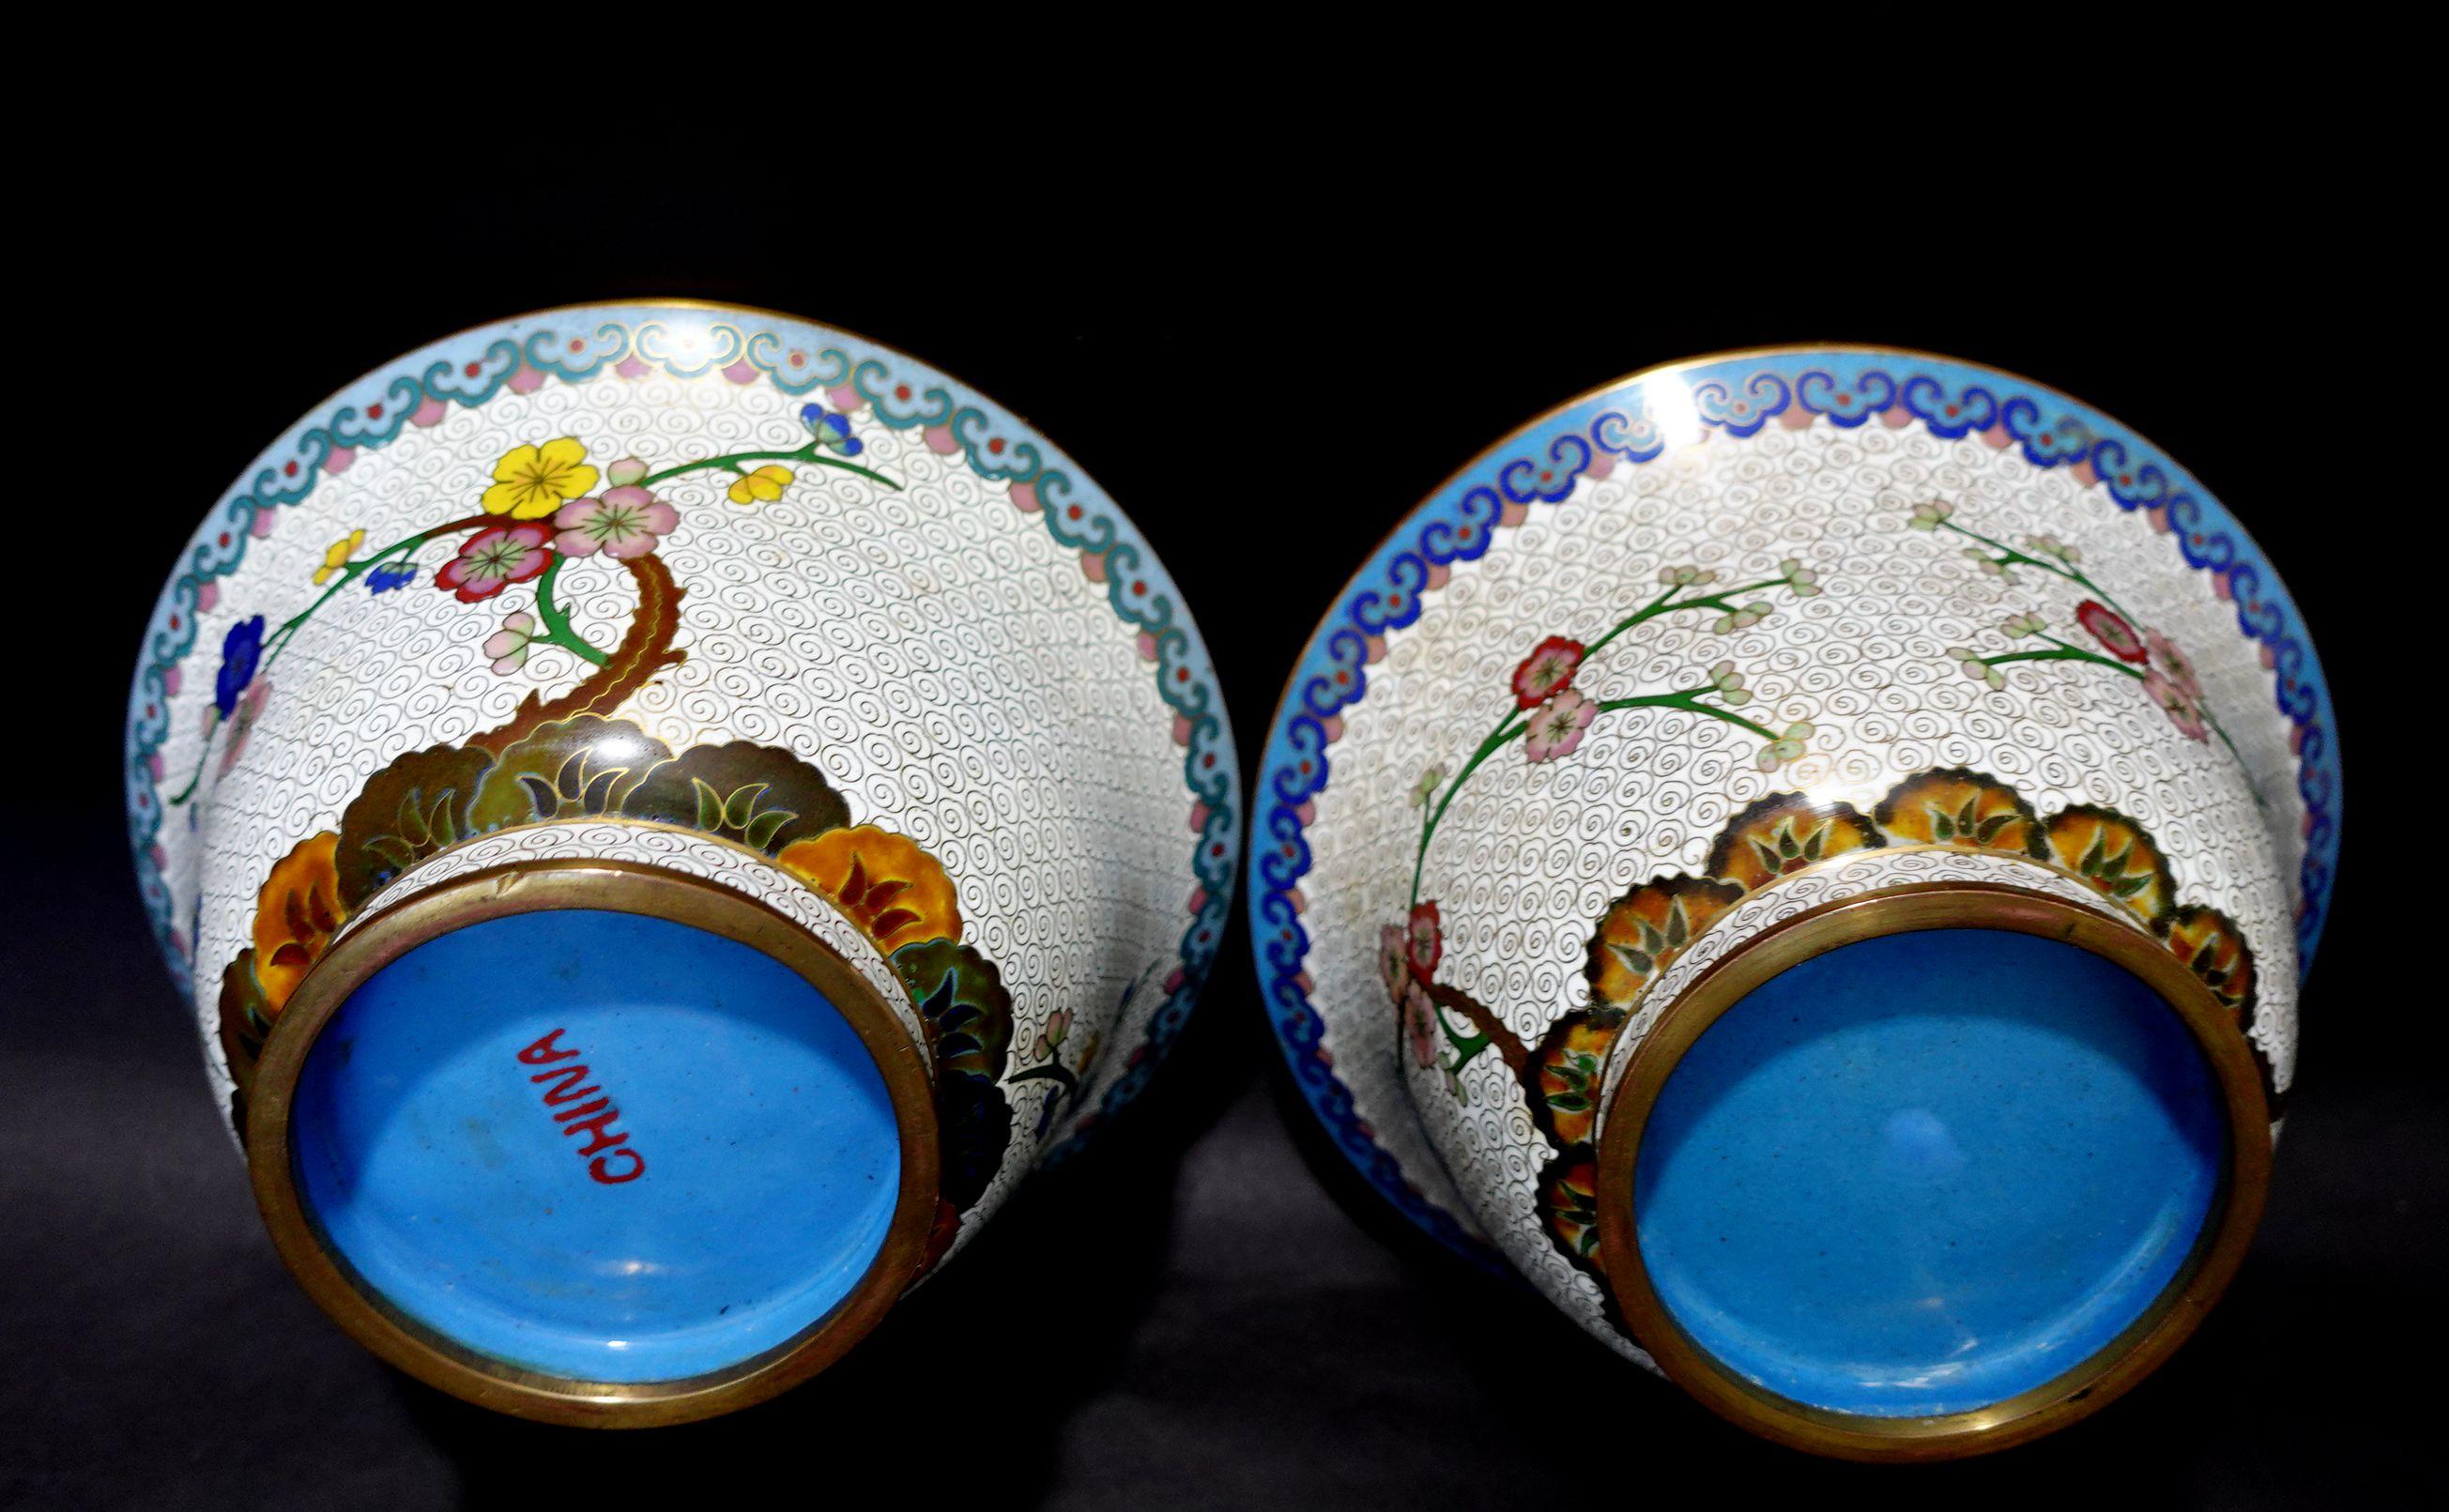 Antique Pair Thick & Heavy Chinese Cloisonné Enamel Bawls 19th Century CO#10 For Sale 10